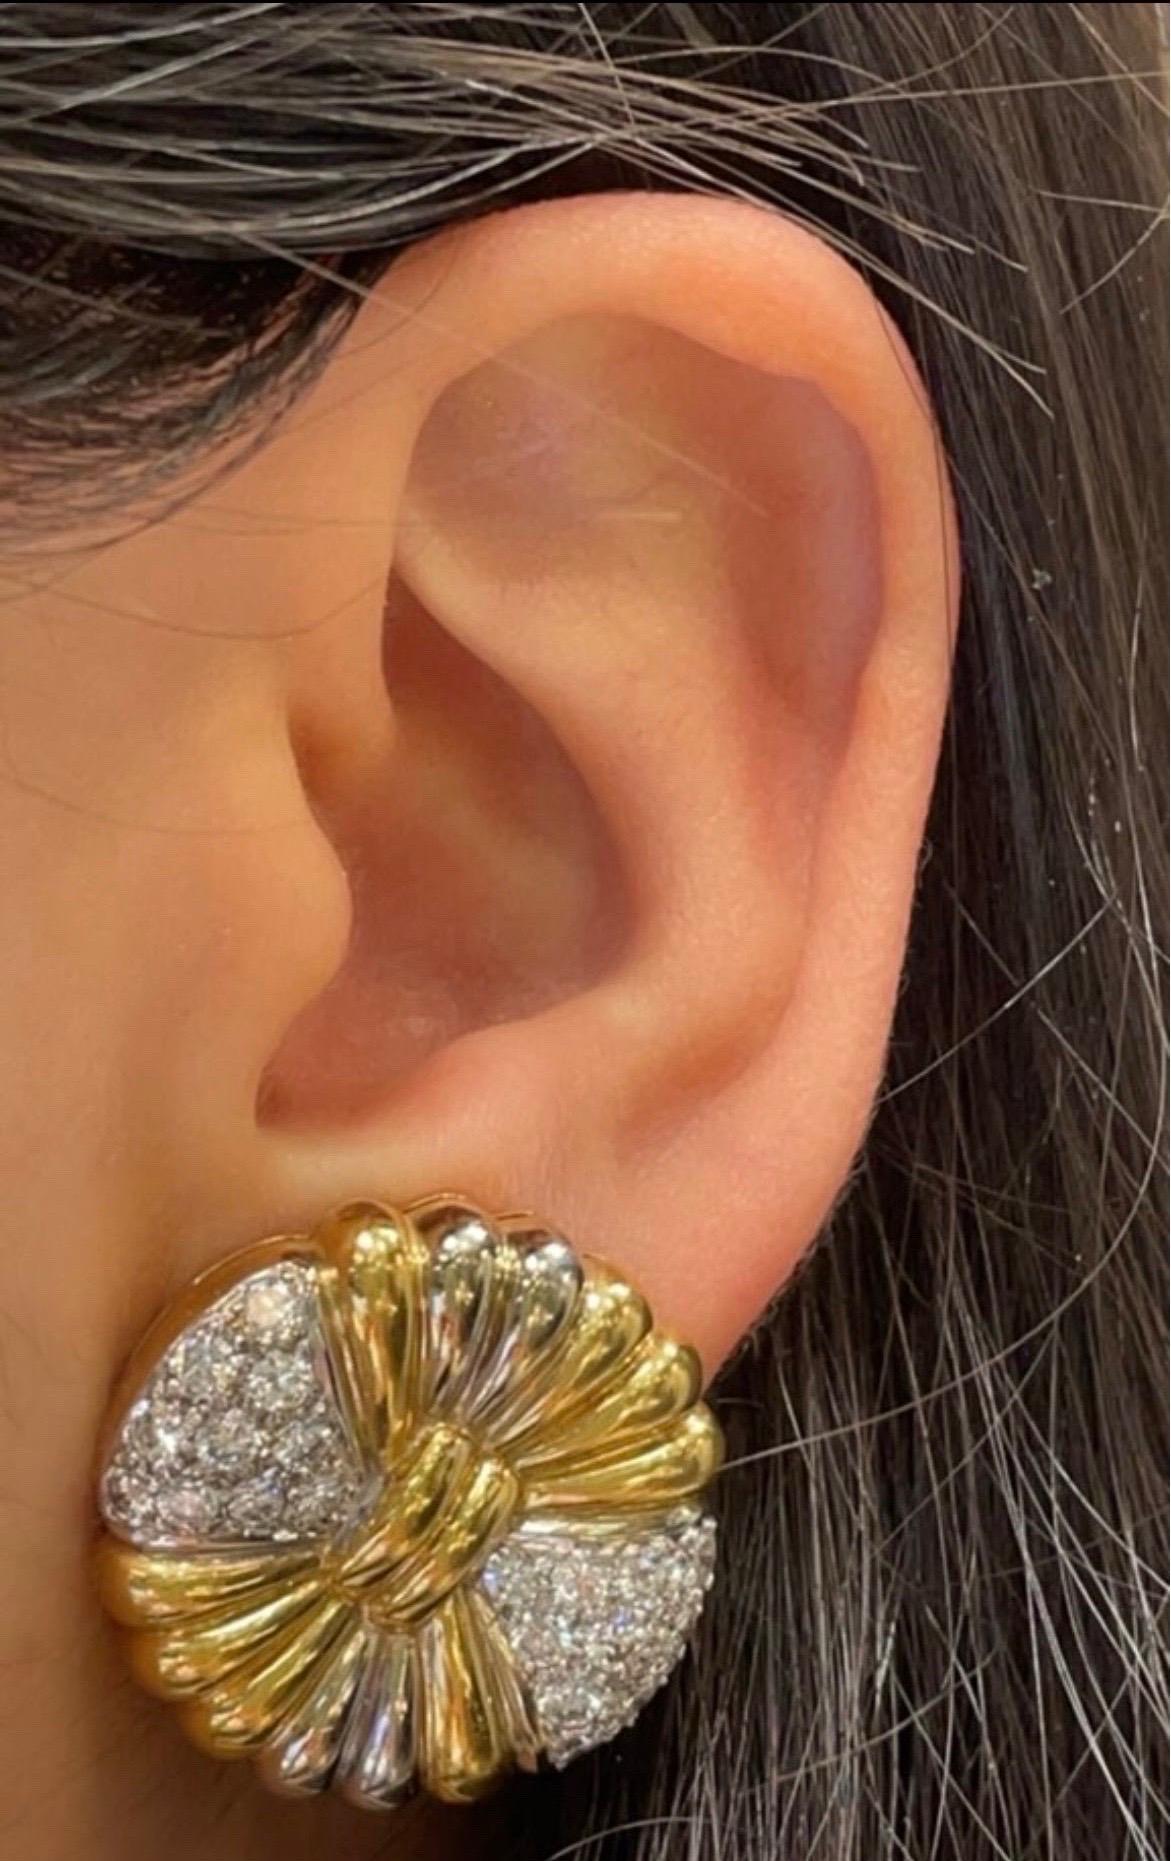 Diamond earrings

Two-tone round-shaped gold and diamond earrings adorned with round-cut diamonds. 

Approximate Diamond Weight: 2.90 Carats
Back type: clip-on 
Approximately Measures 1